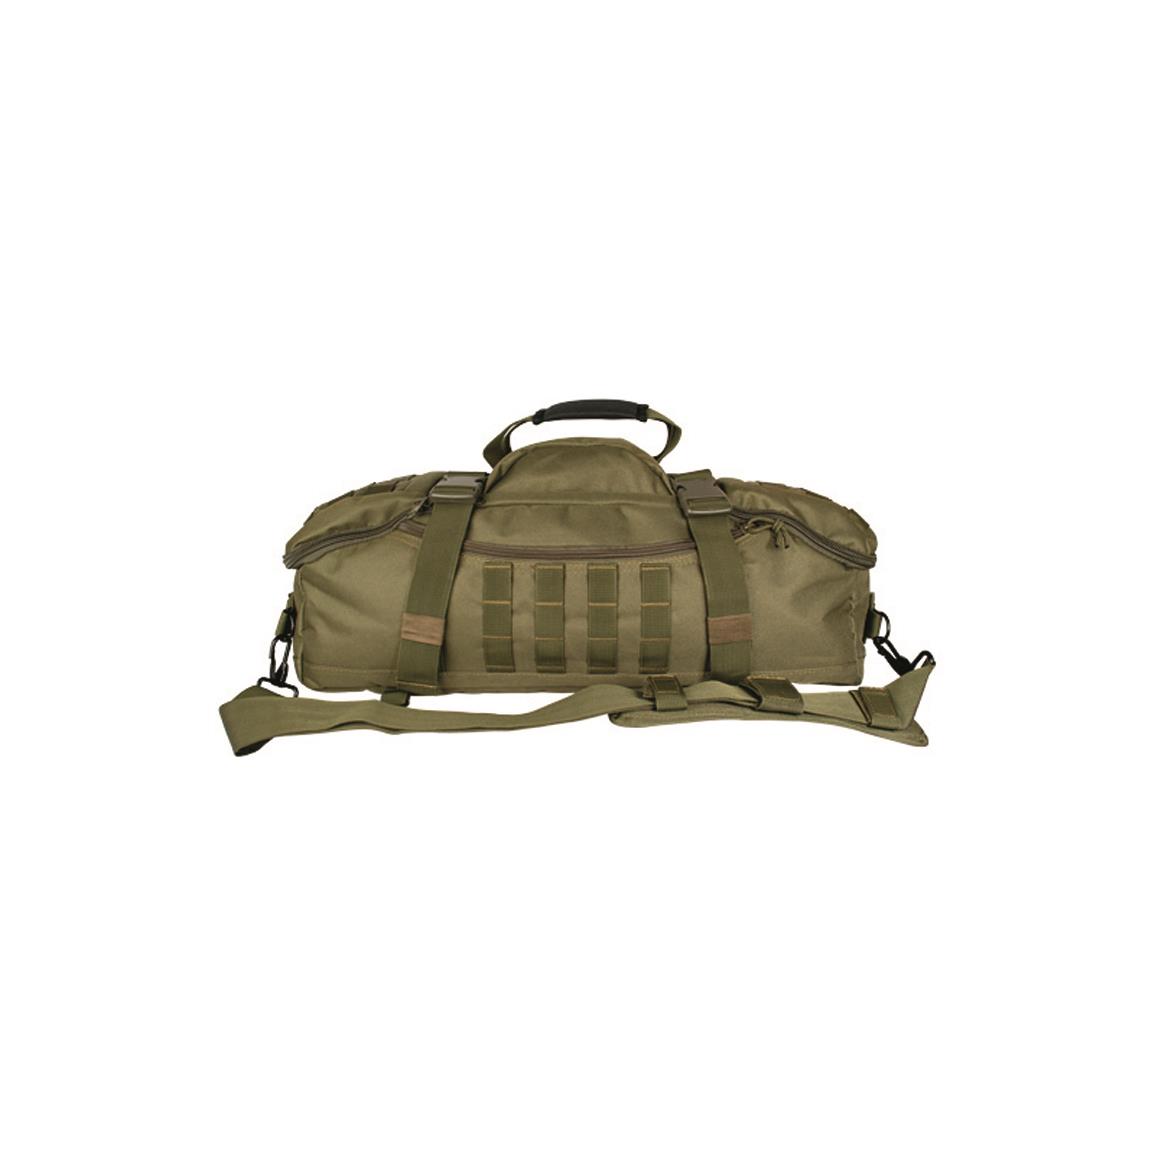 Danish Military Surplus MOLLE Equipment Pouch, New - 703626, Military ...